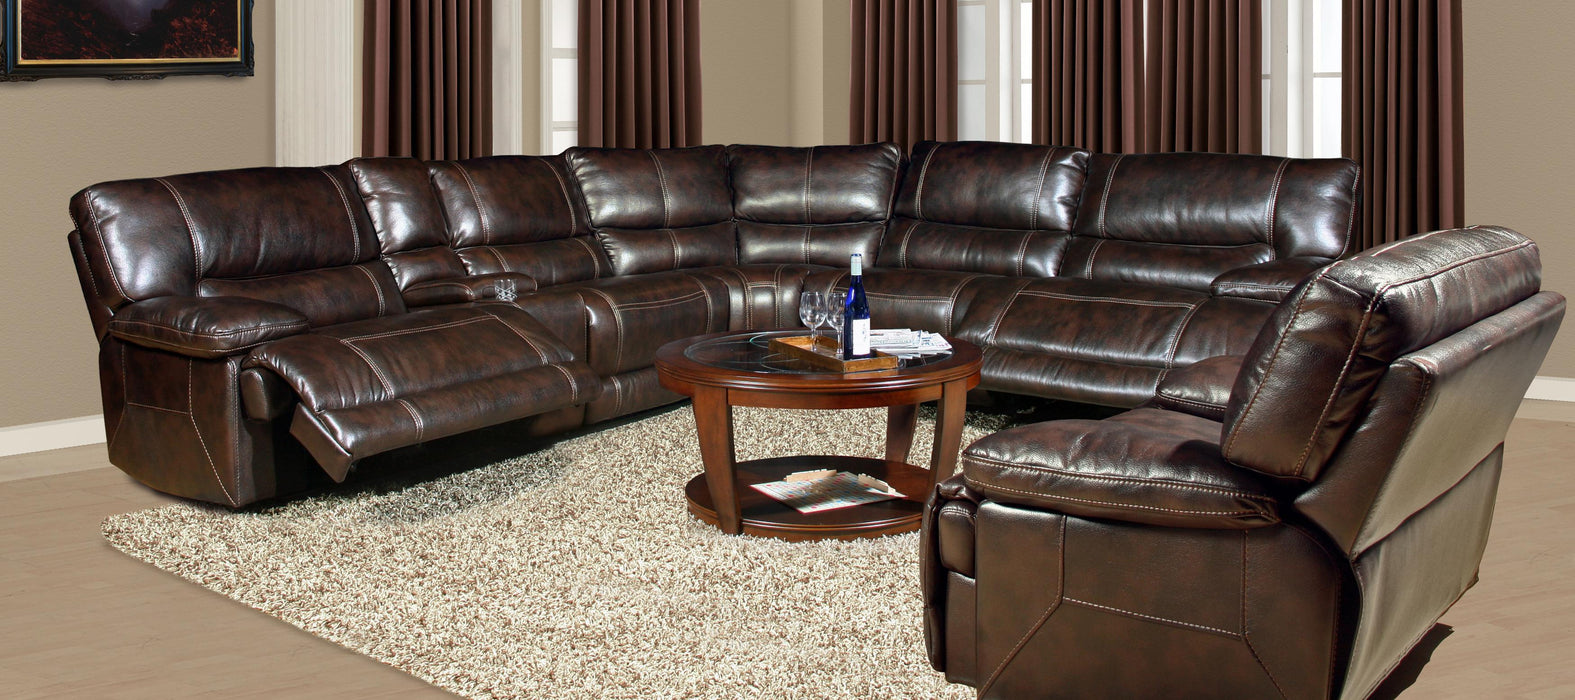 Parker House Pegasus Armless Chair Recliner in Nutmeg